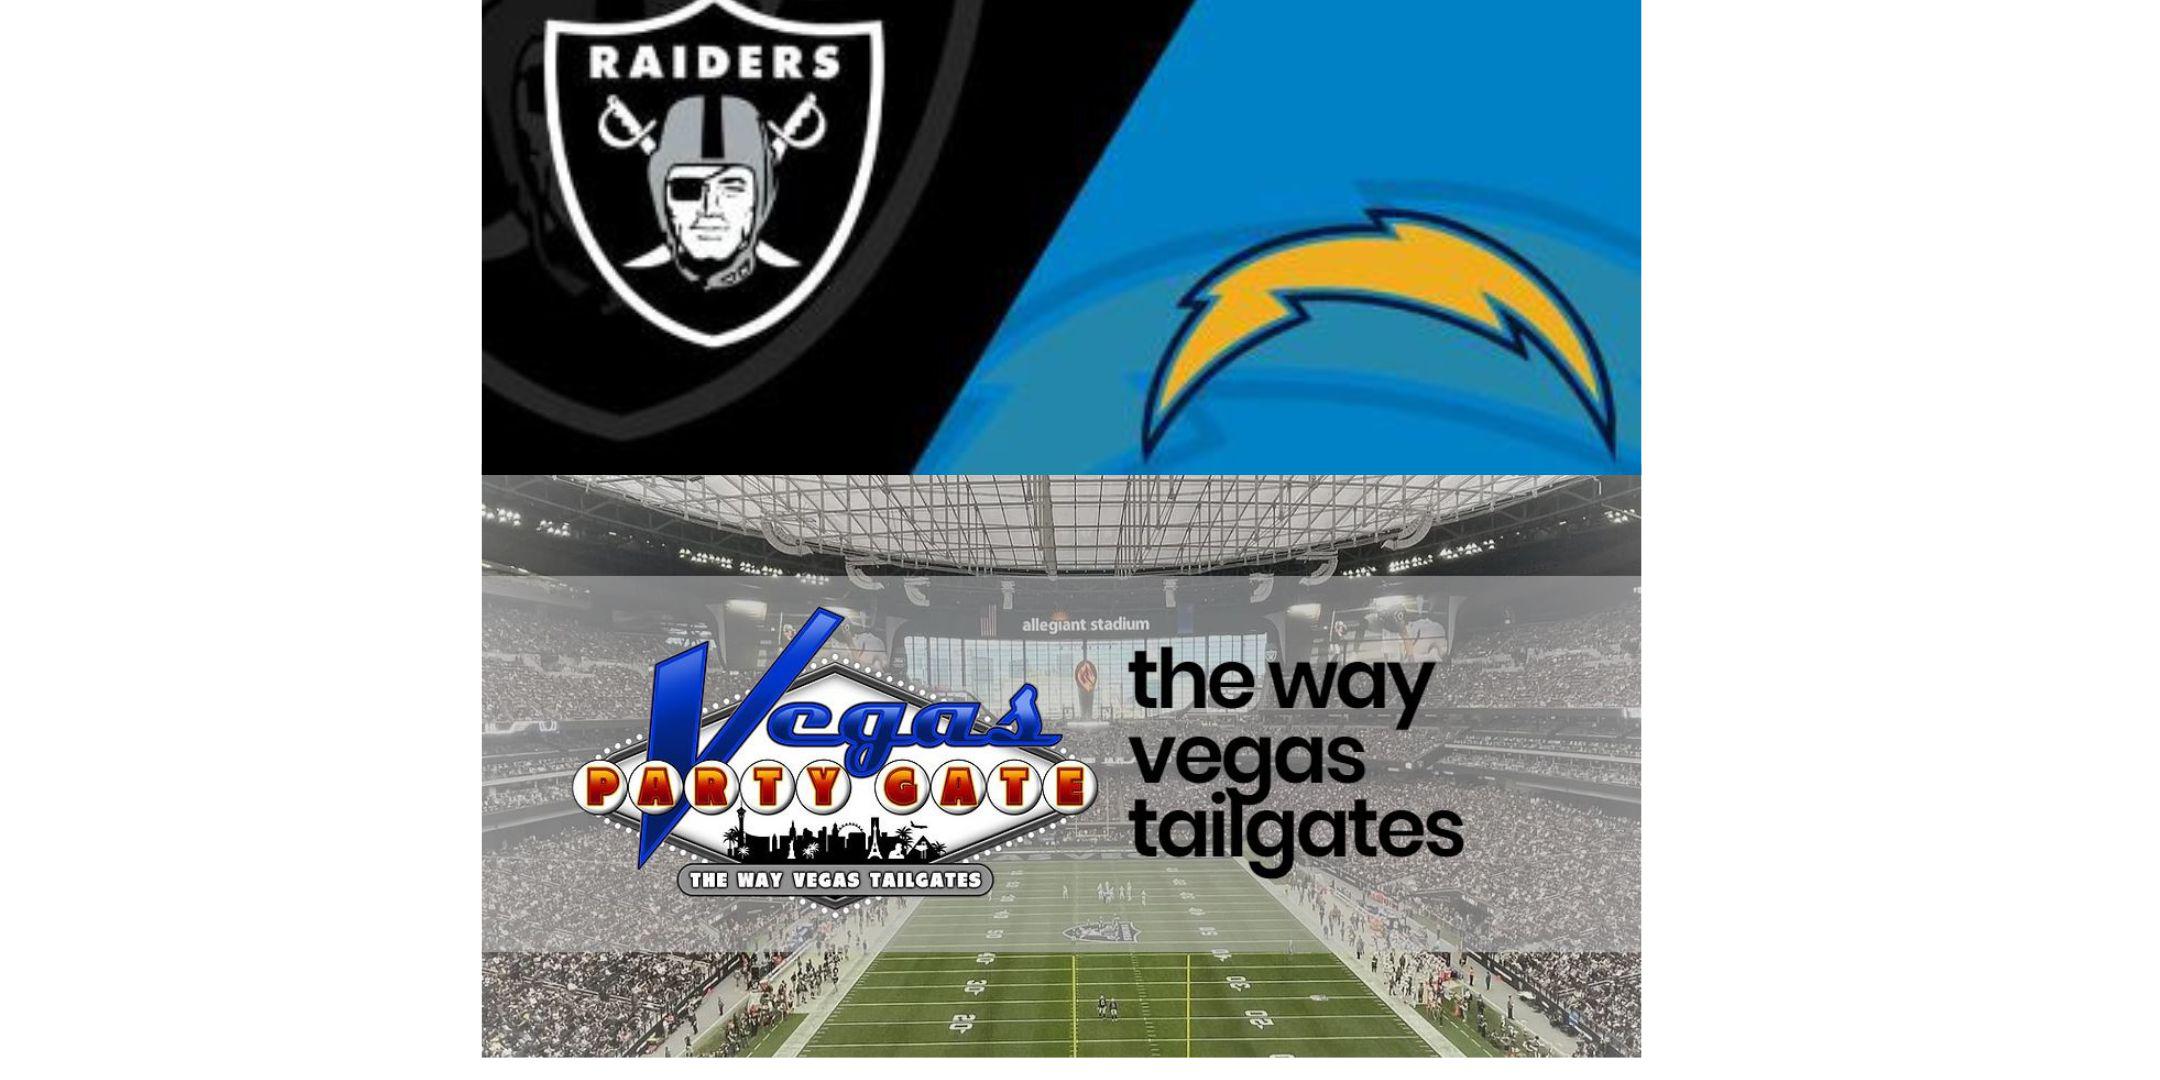 raiders vs chargers tickets